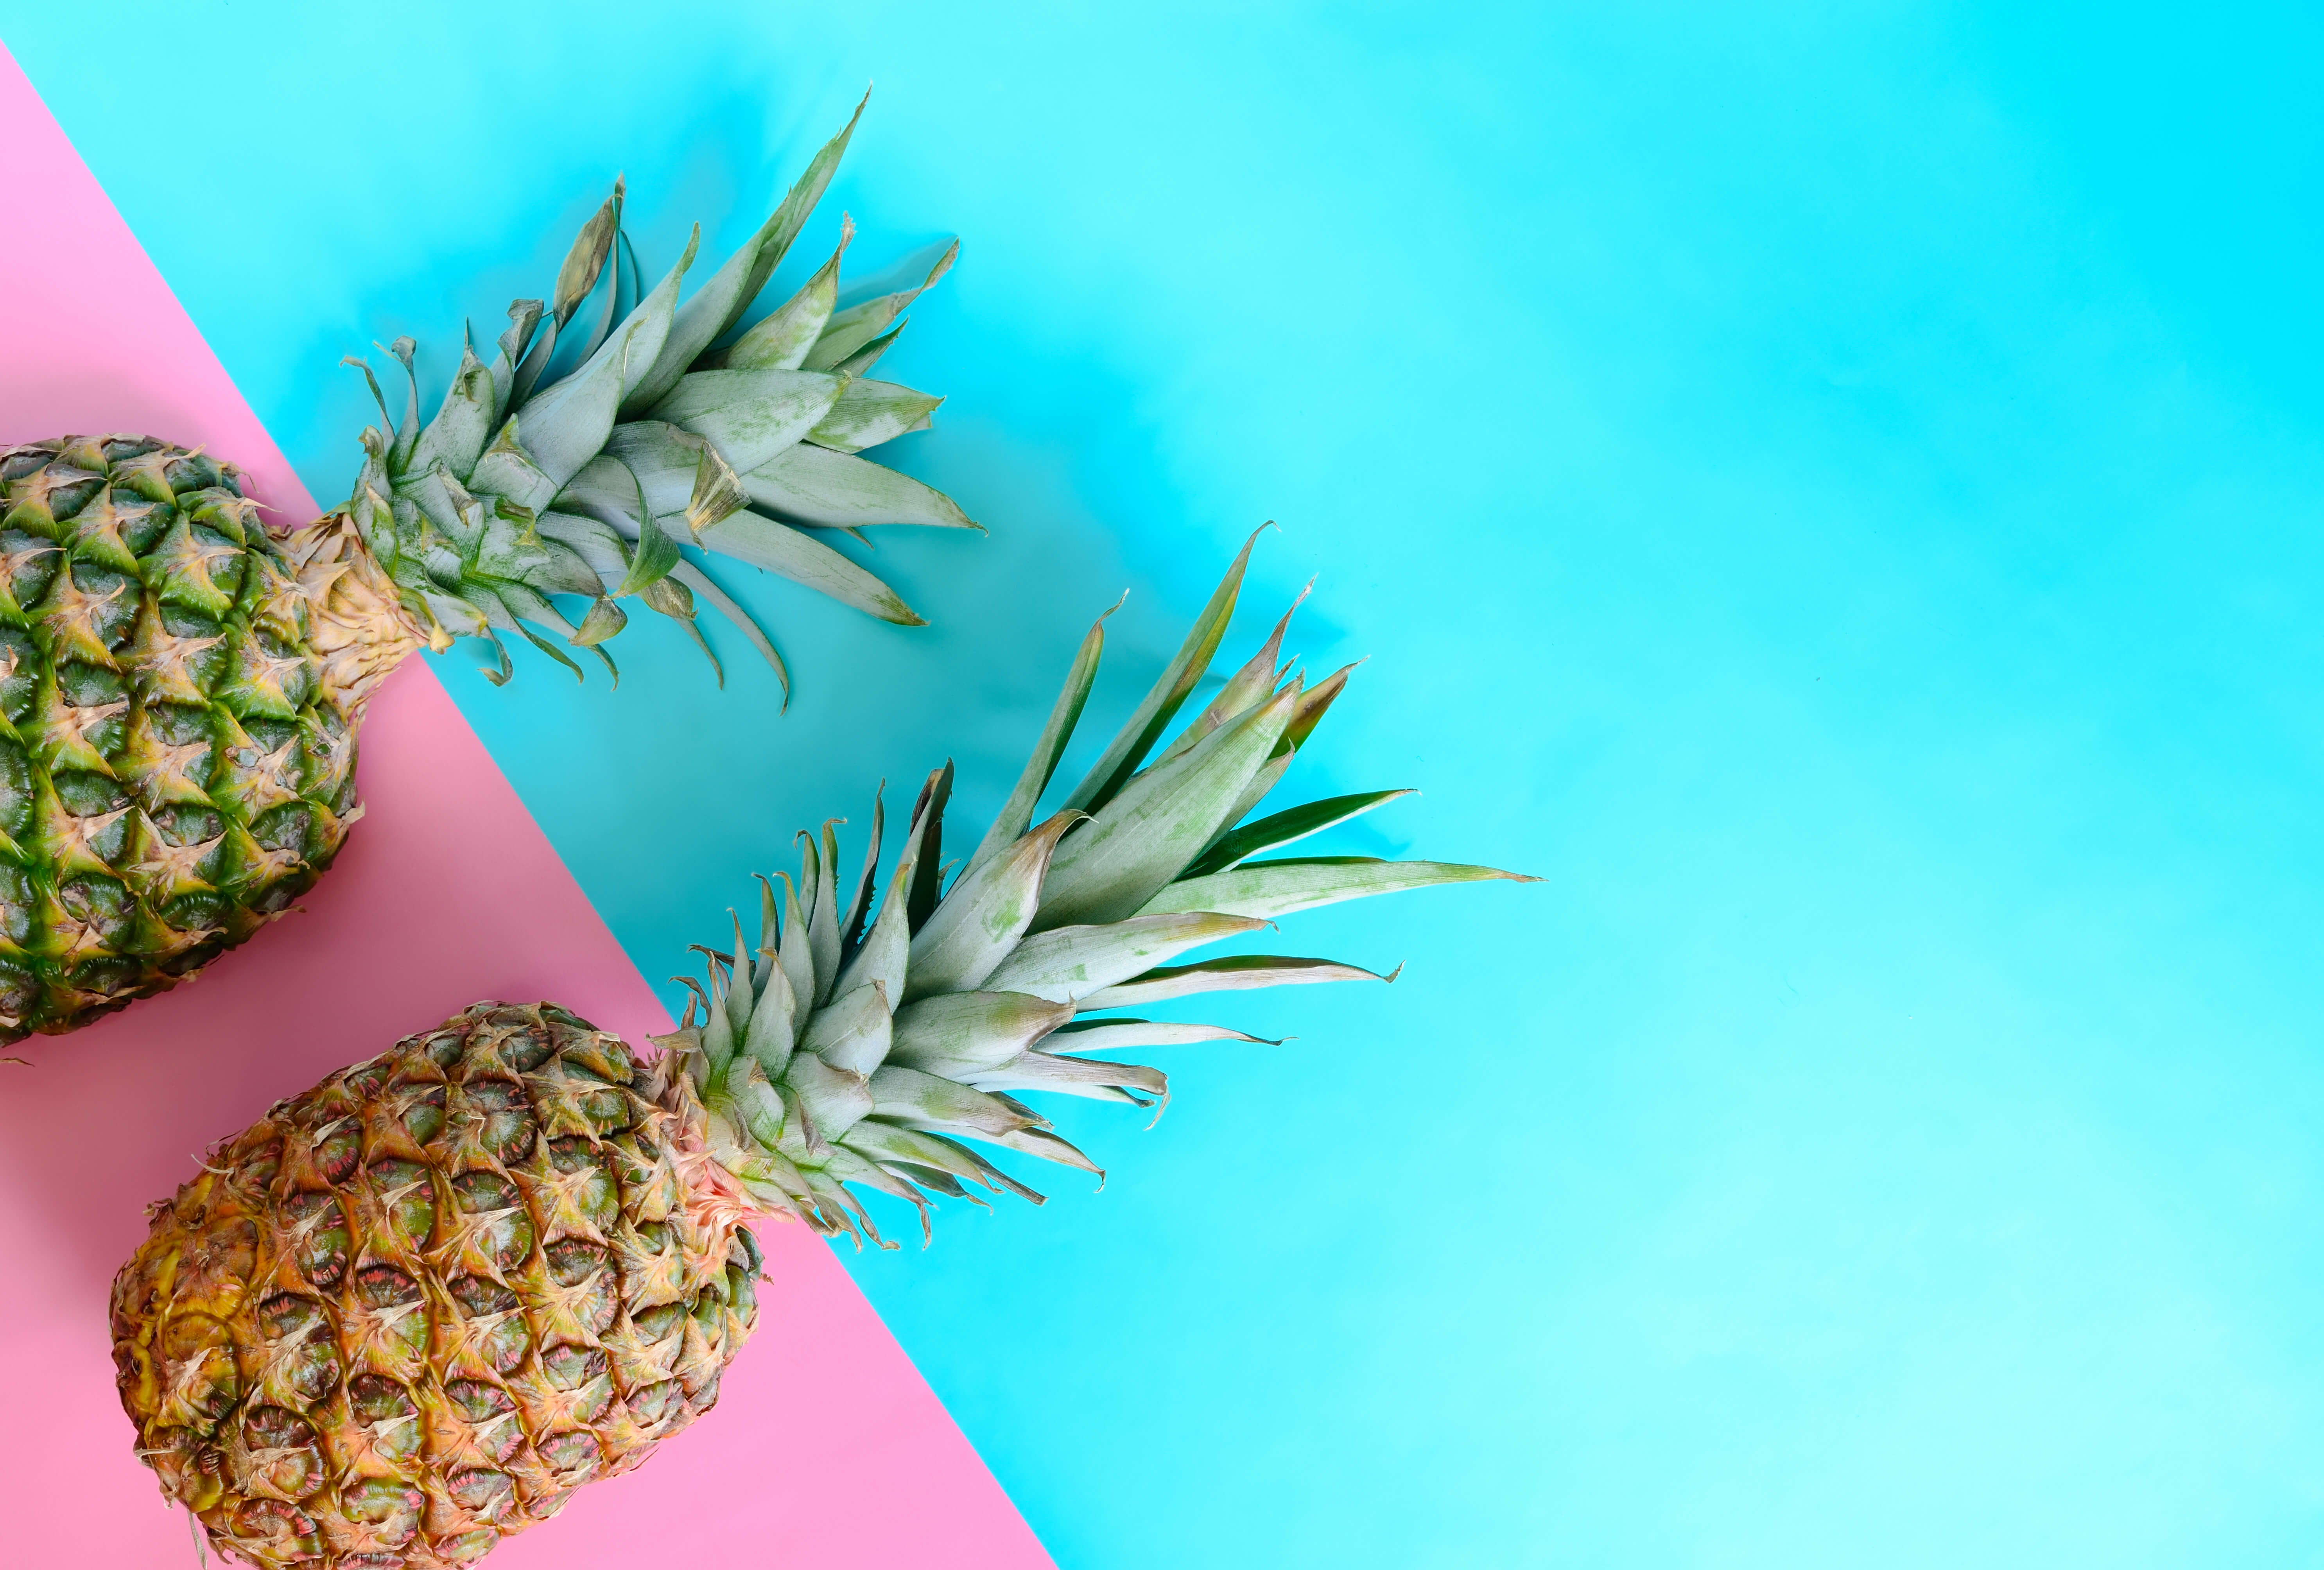 Two pineapples against a hot pink and turquoise blue background. 